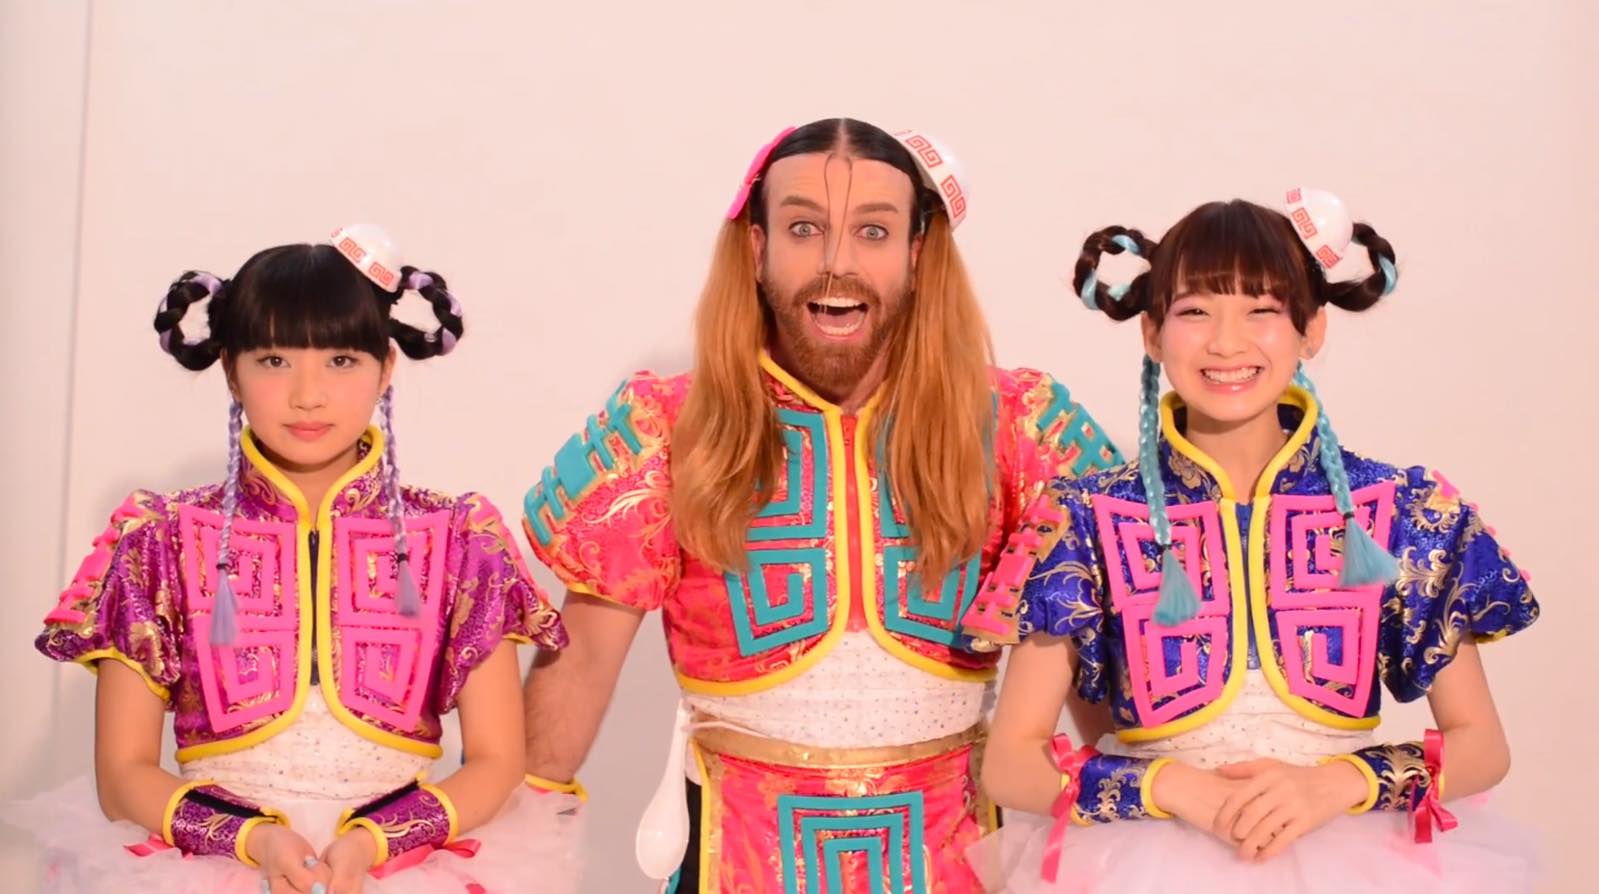 LADYBABY Announce 3rd Single “Renge Chance!” and 1st Oneman Live in Japan!